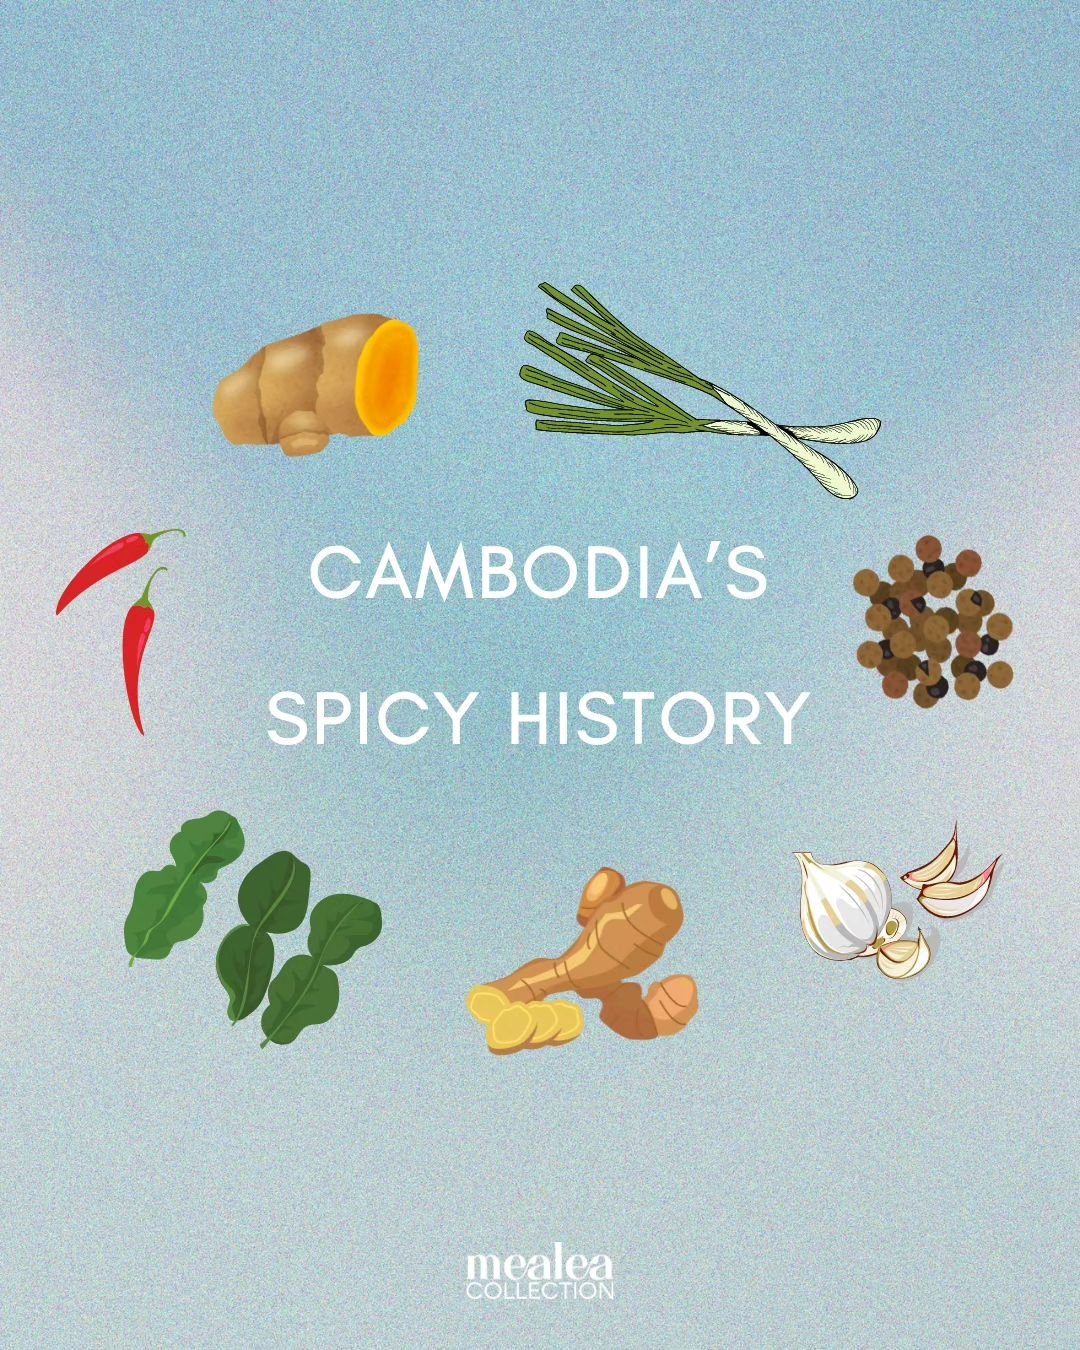 Cambodia is all about the heat in its own unique way that unfortunately many food critics and travelers tend to never completely understand the way we Khmers do. From ancient curry spices, to Cambodia's world renowned peppercorns, and the introductio